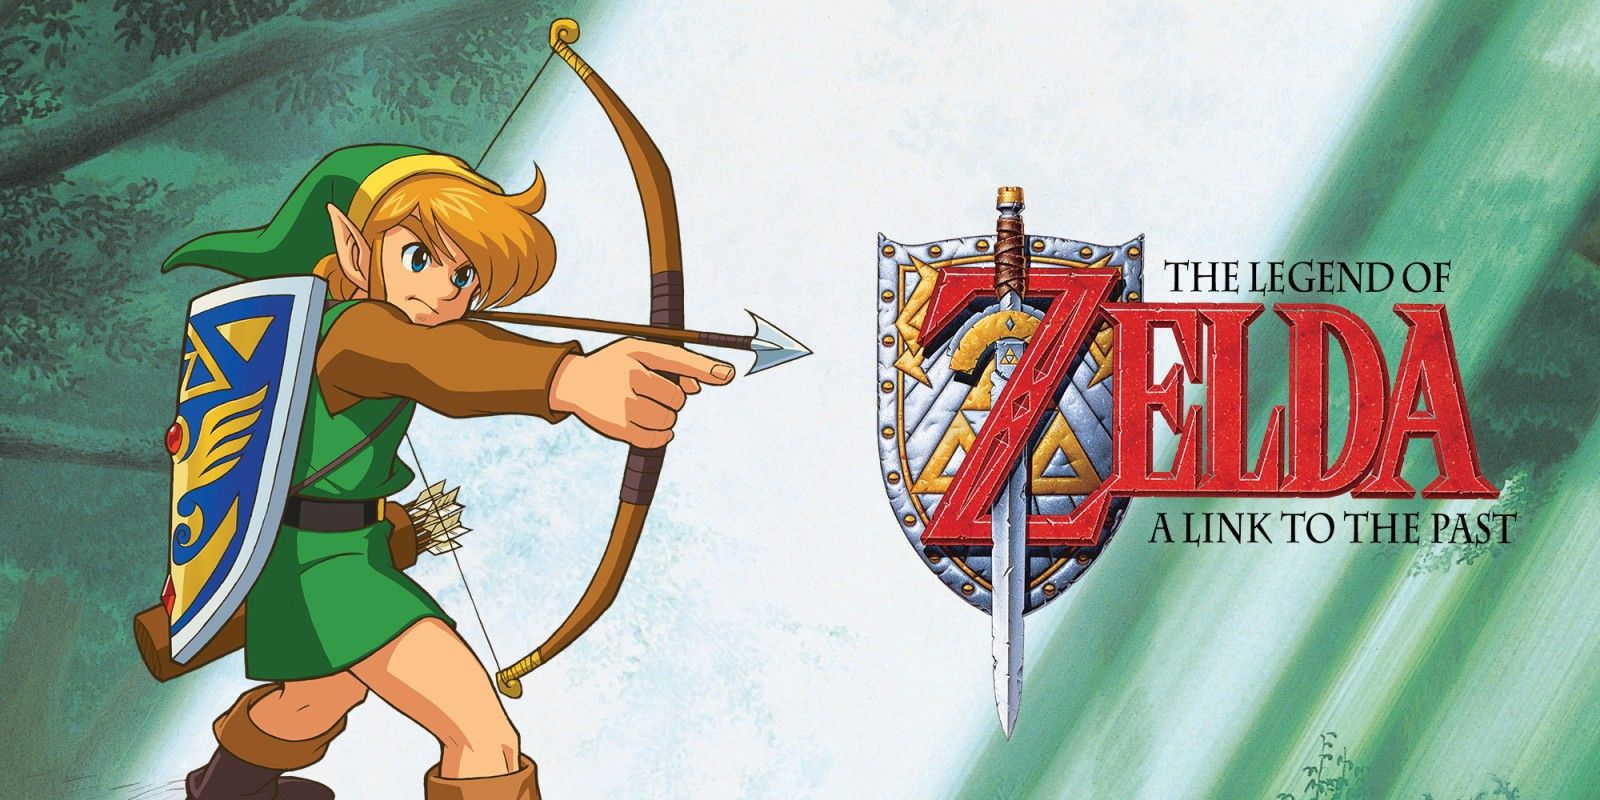 Link points his bow and arrow next to the Legend of Zelda A Link to the Past title